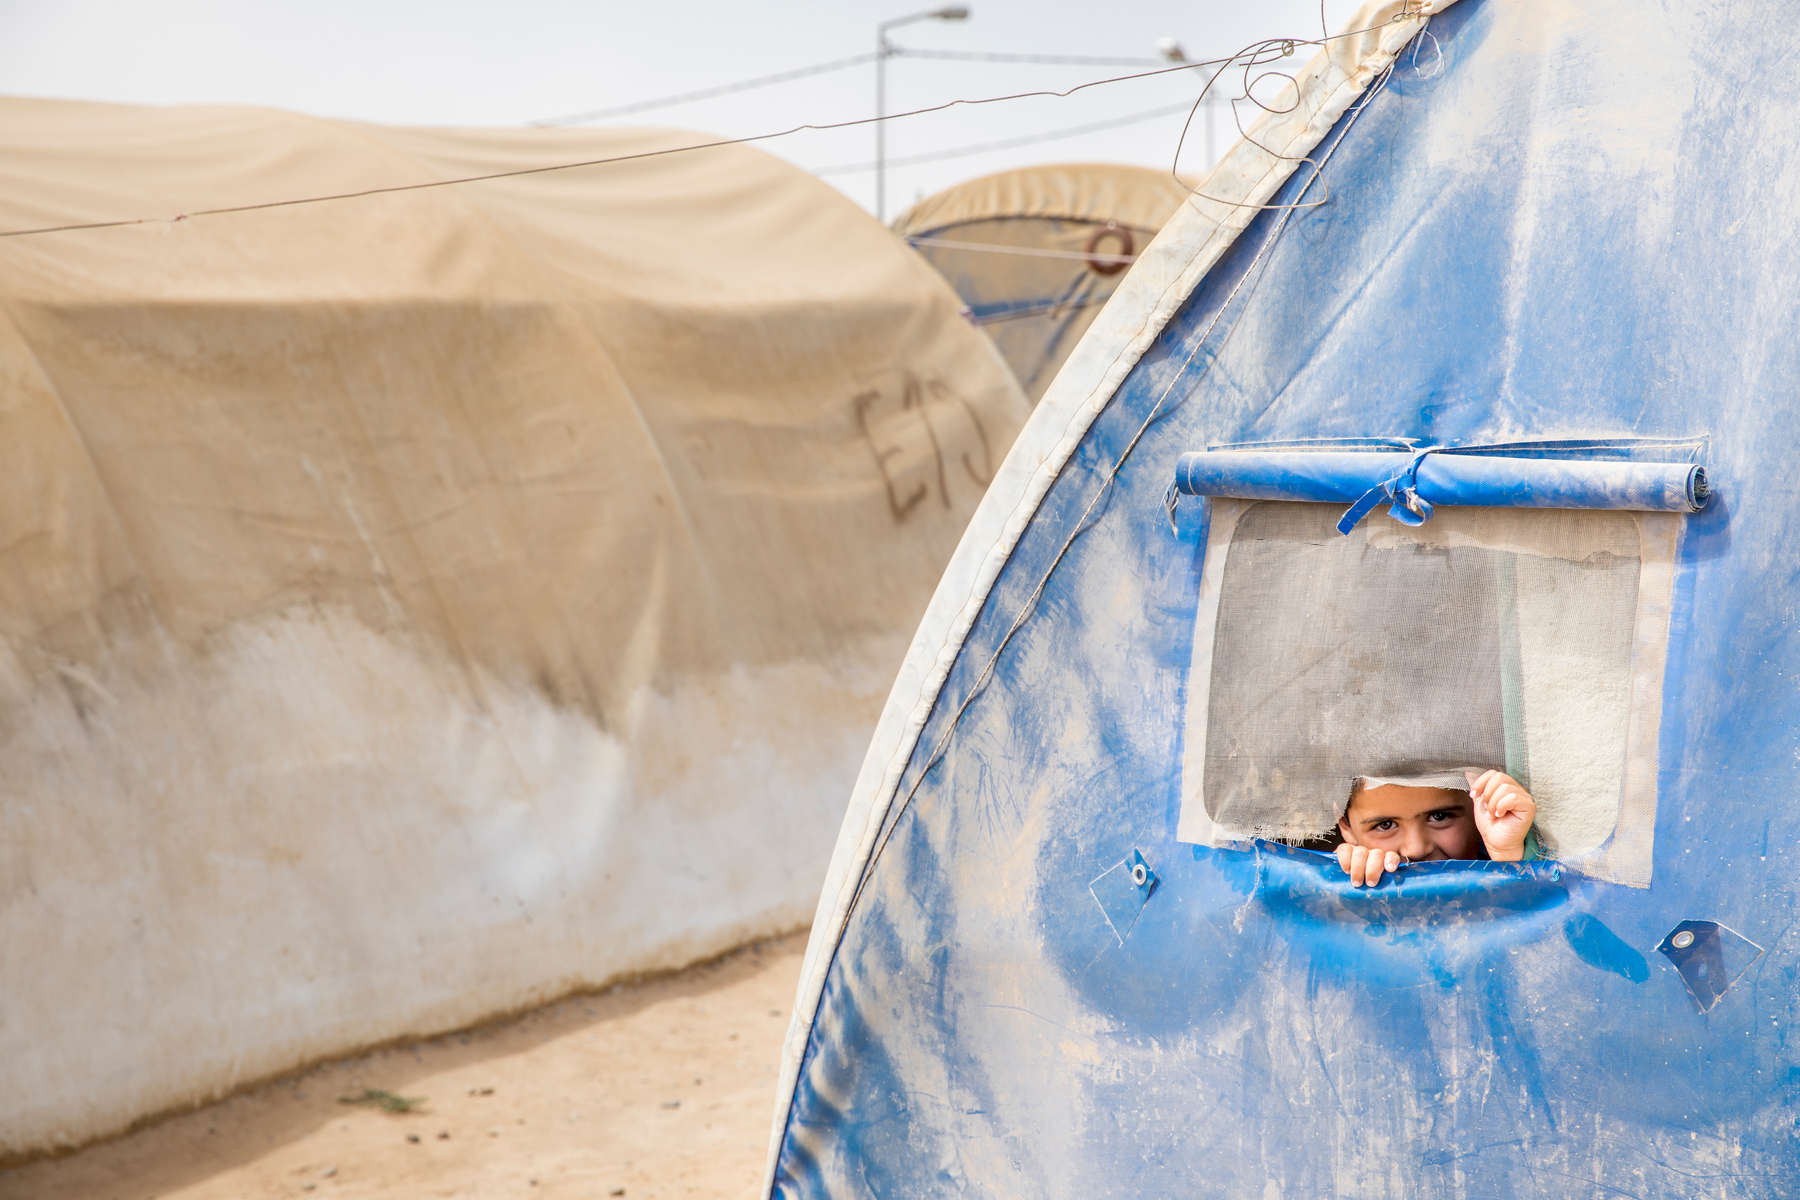 A boy looks out the window of his family's tent at the Jeddah IDP camp. Families fleeing the violence in Mosul are often unable to bring anything with them. In displacement camps, Mercy Corps is delivering essential supplies to help people survive. New arrival kits include: cooking pot and pan, plates, glasses, silverware, serving spoon, stainless steel kitchen knife, 6 light weight blankets, 1 rope, 1 tarp and 2 jerry cans. To provide one family with these household essentials costs approximately $70 USD / 60 Euro / 54 GBP.